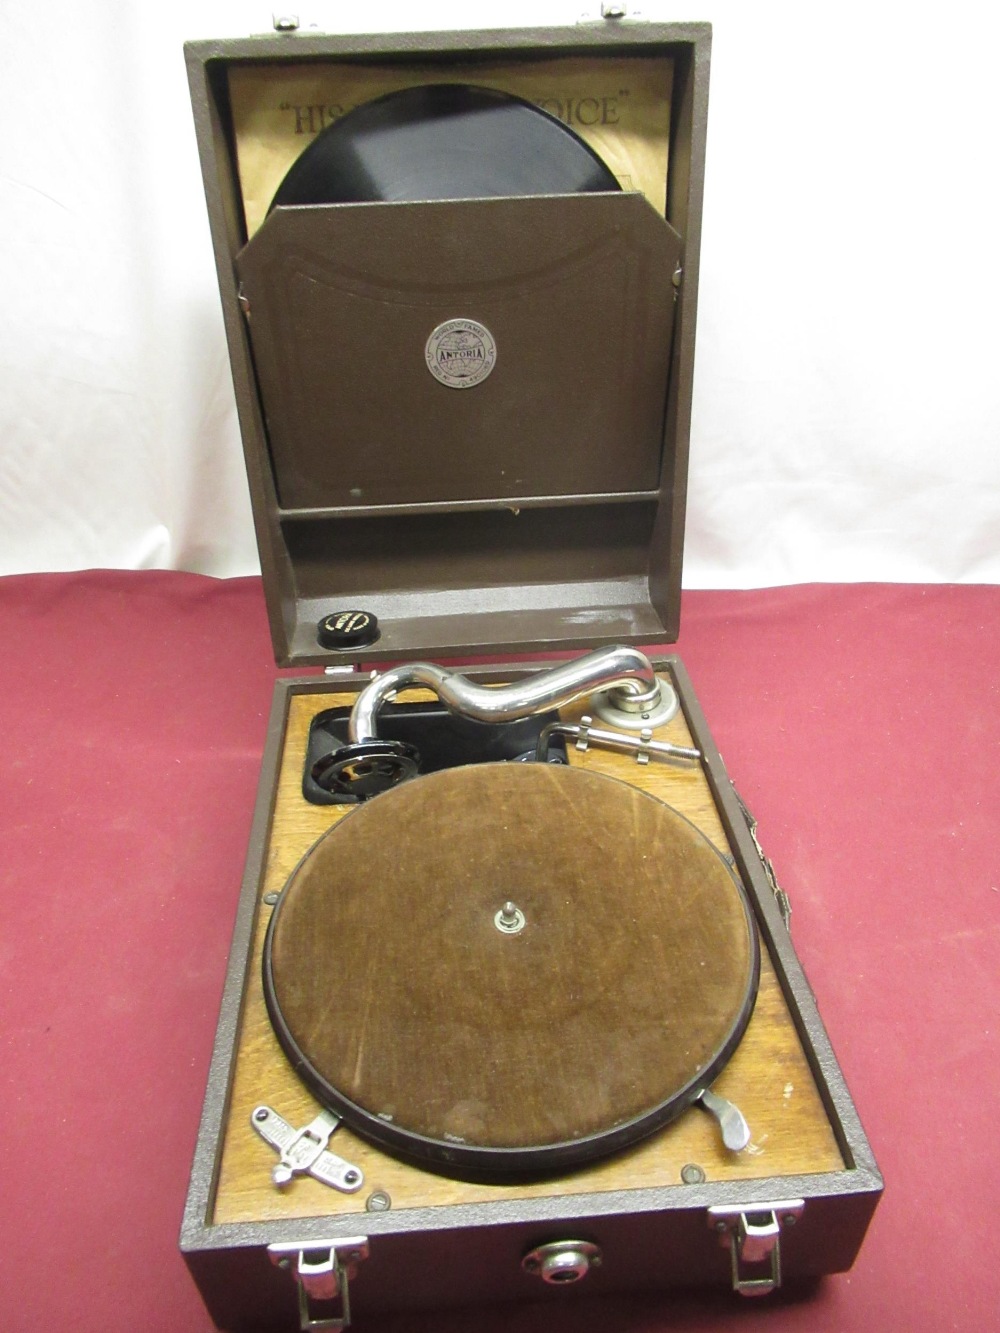 1930's Antoria wind up portable gramophone player in brown leatherette case. REG no 4901089